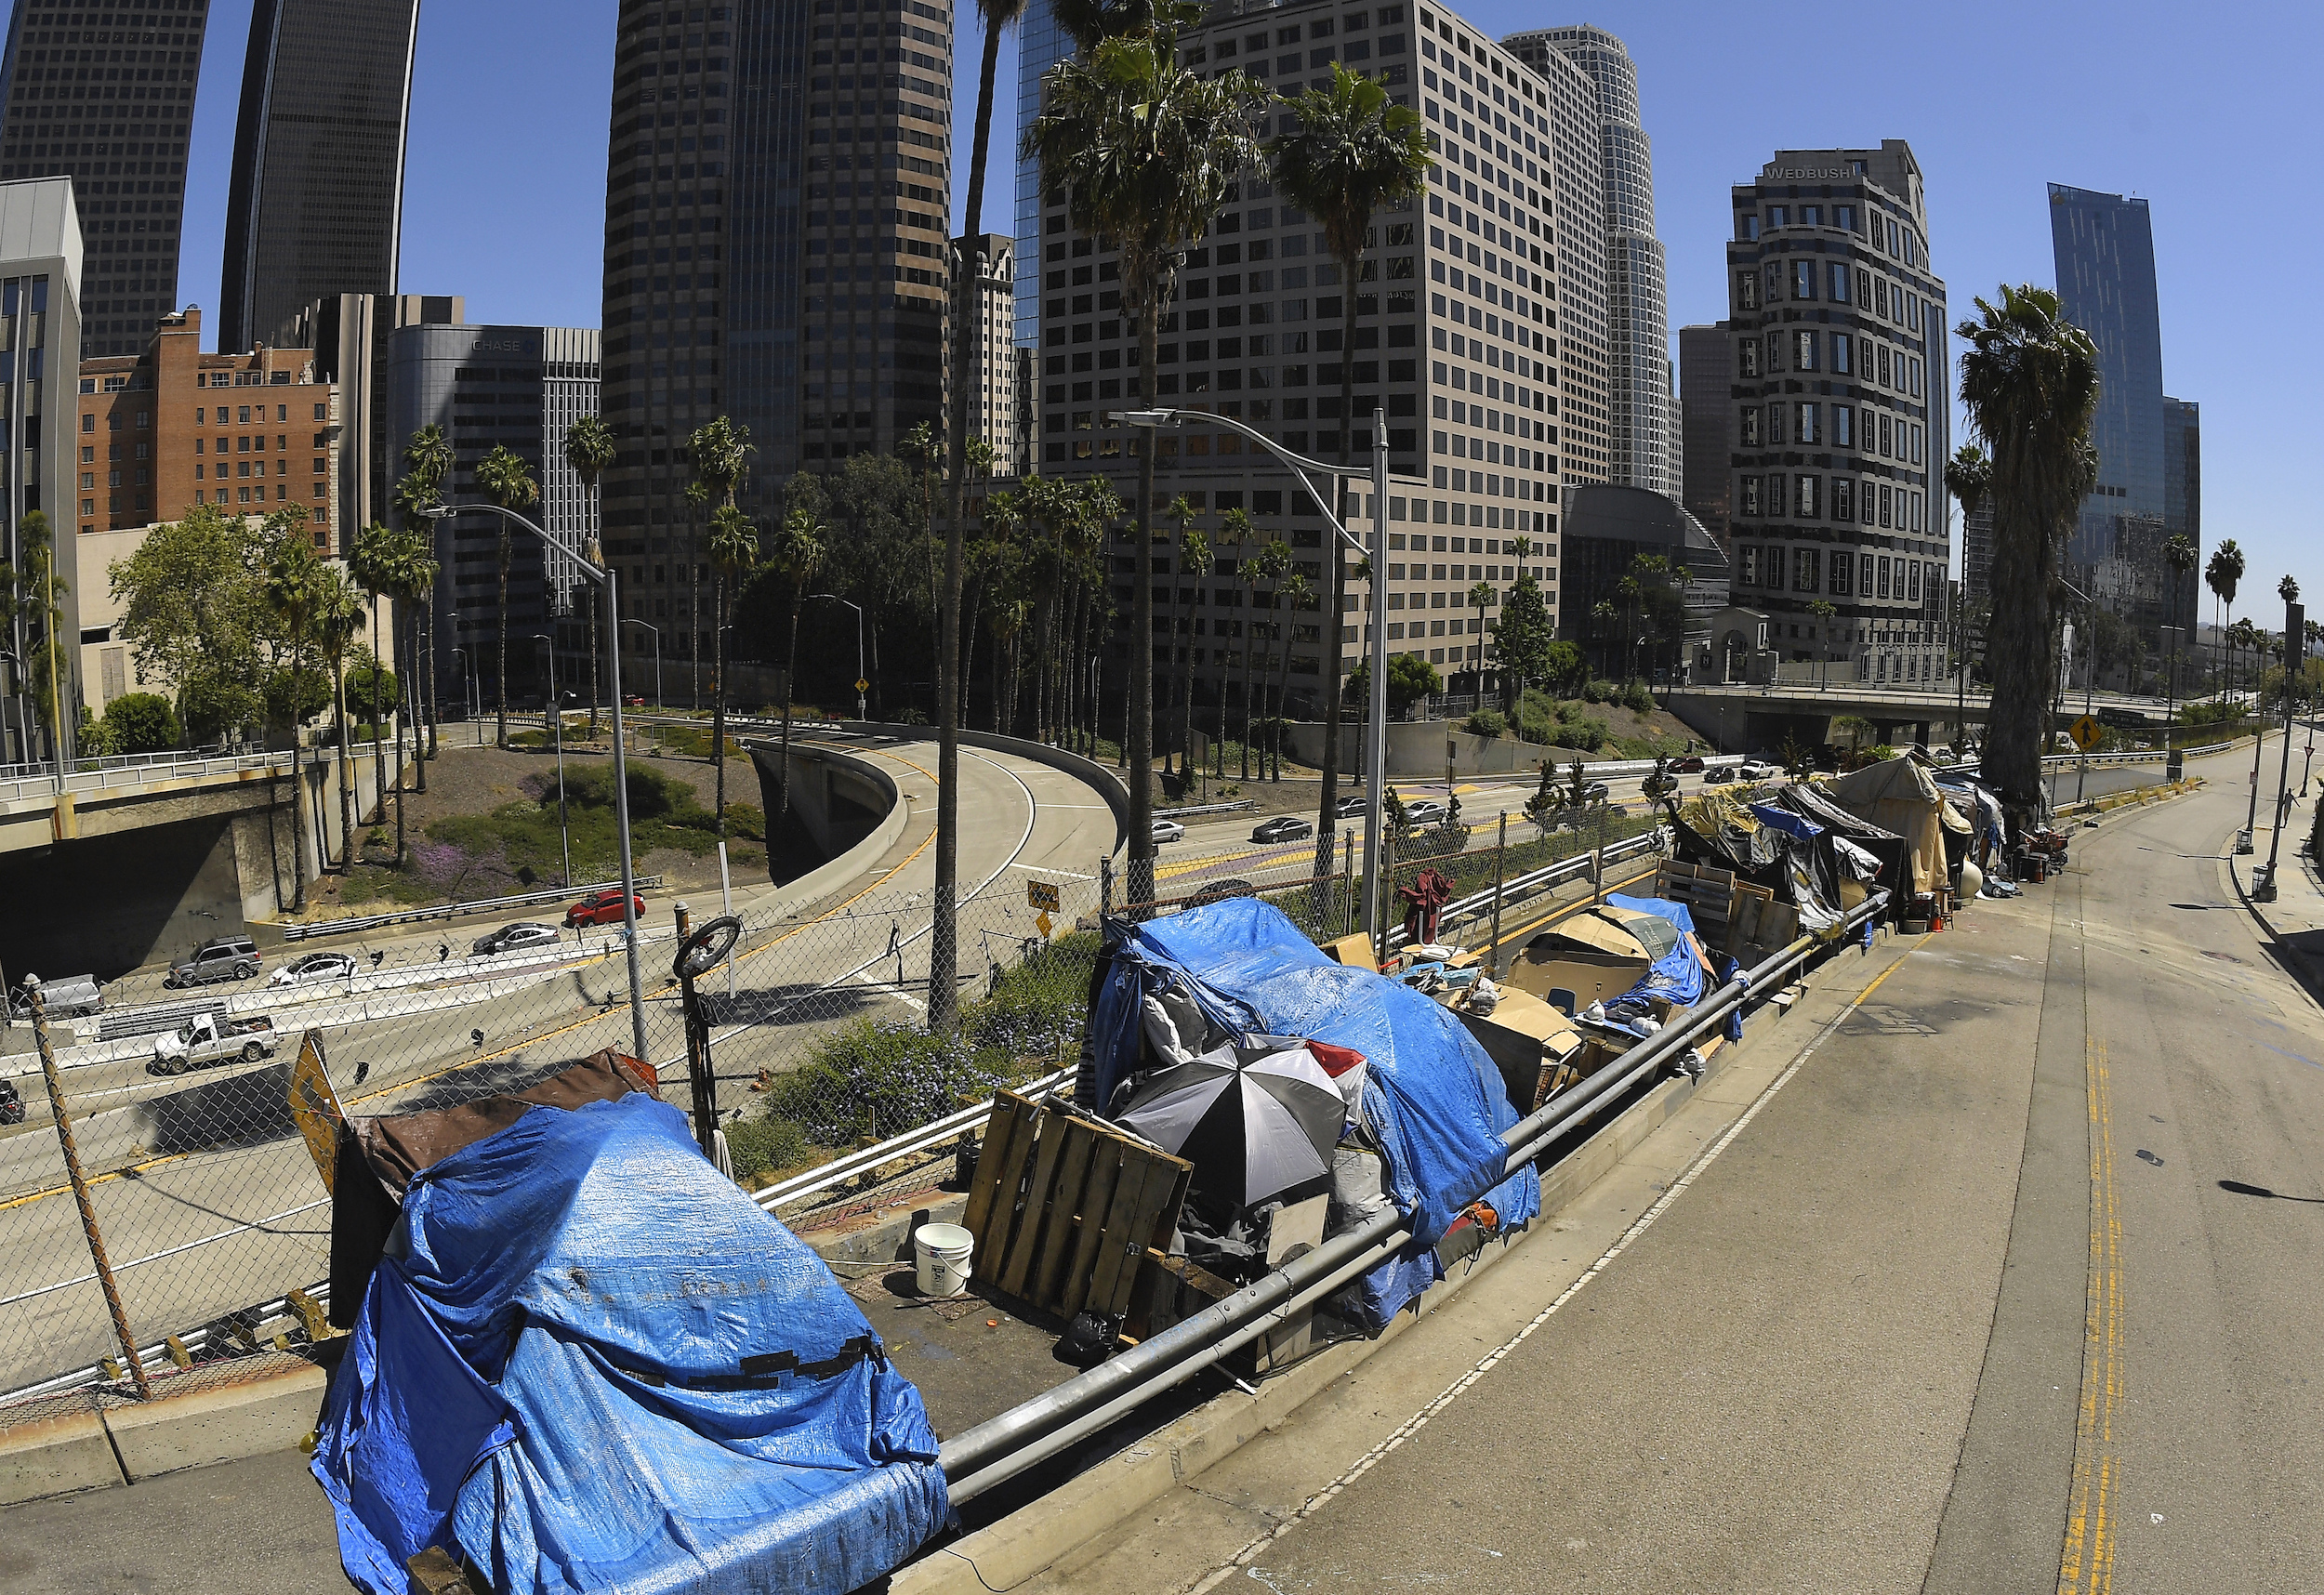 Homeless population in Los Angeles surged 10% in last year | Courthouse ...